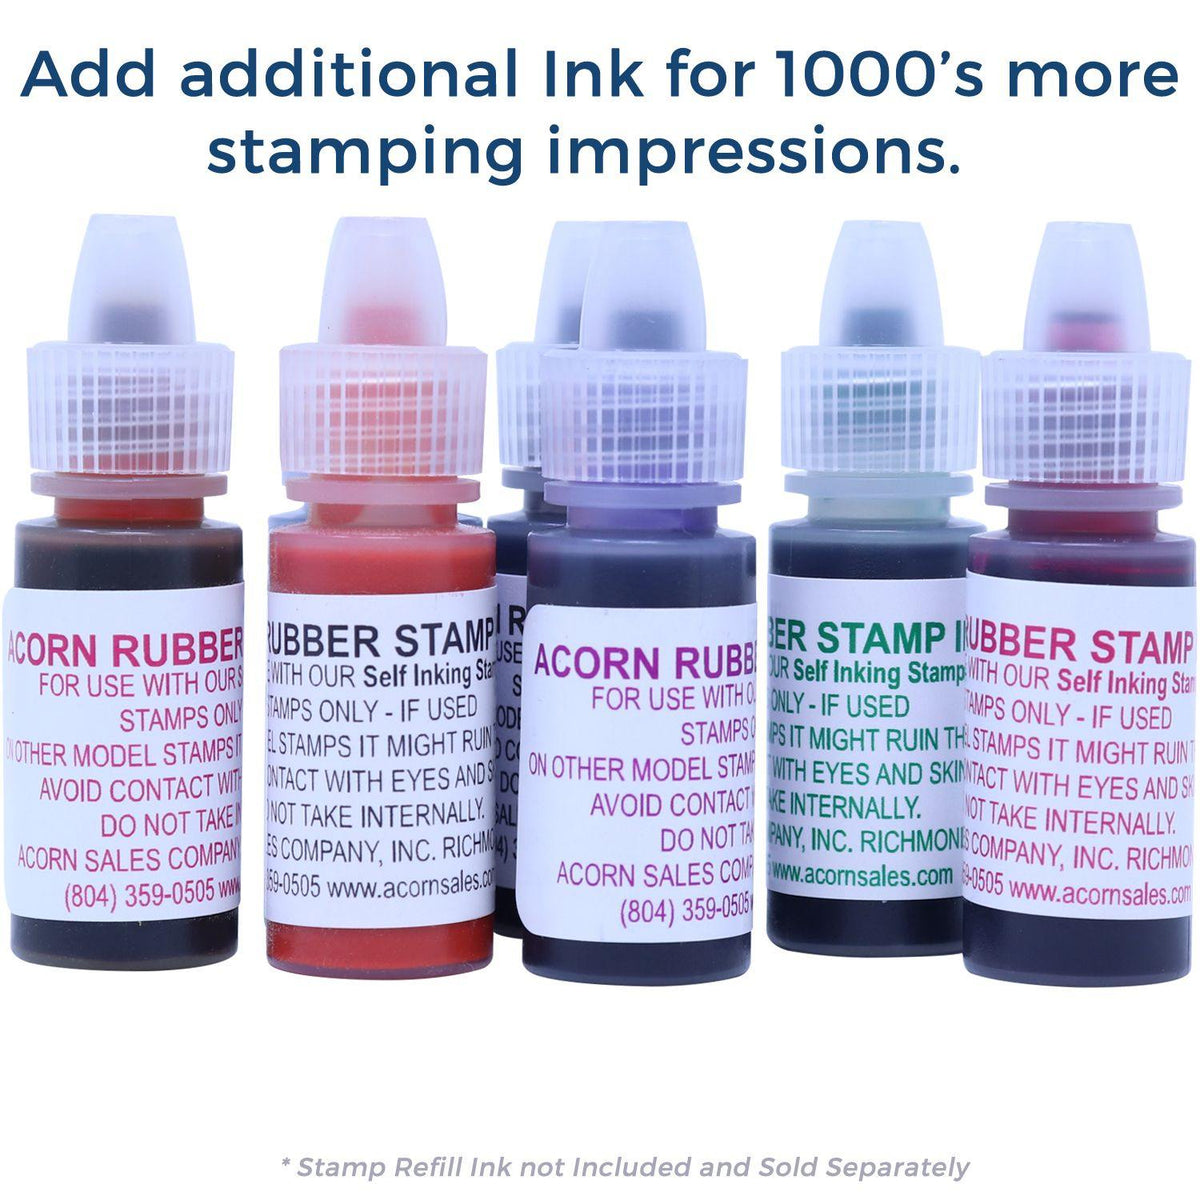 Refill Inks for Large Pre-Inked No Such Number Stamp Available